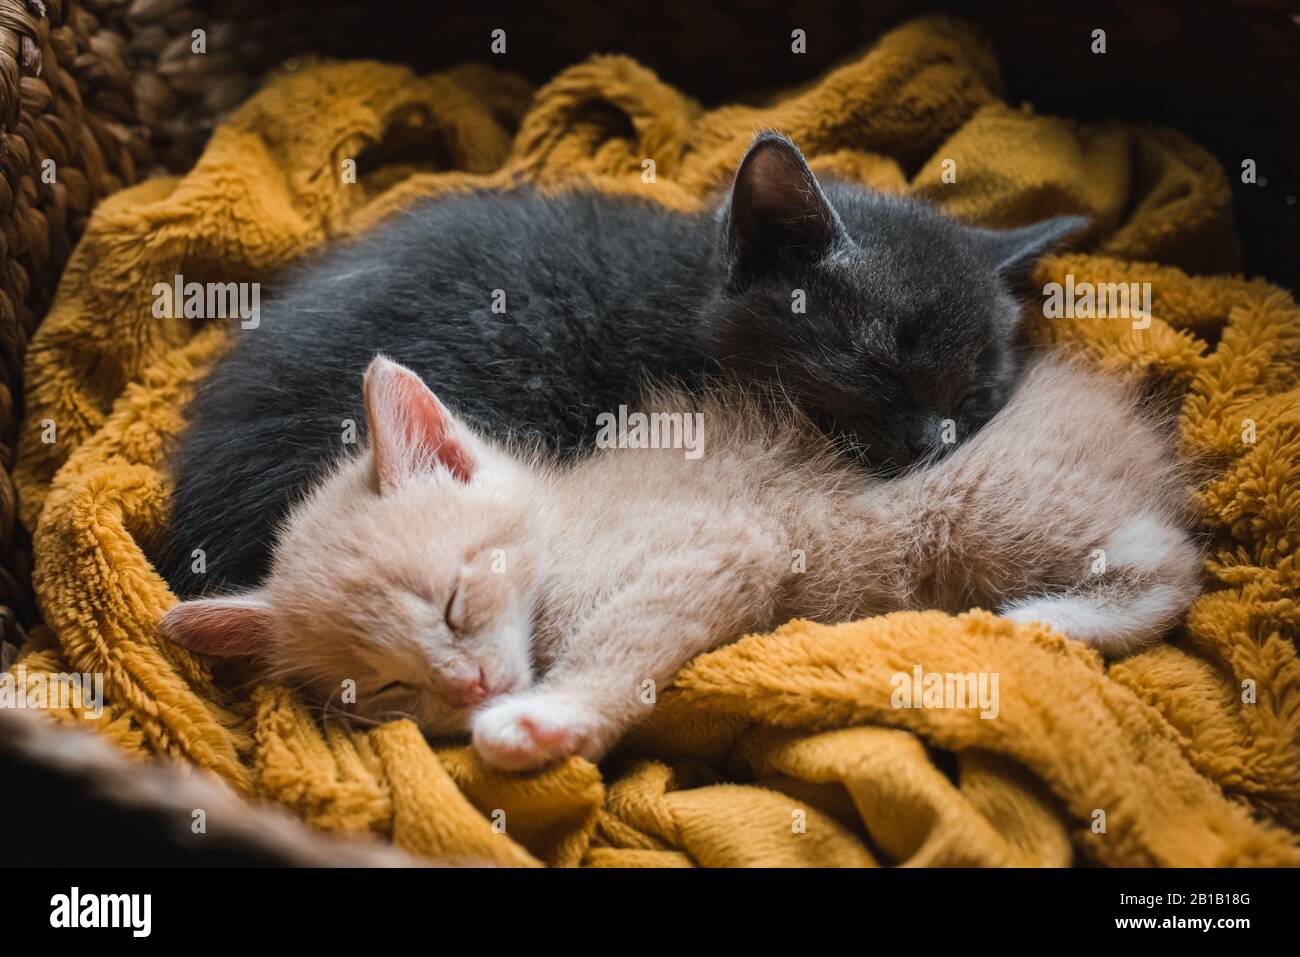 Two kittens curled up asleep together on a blanket in a wicker basket. Stock Photo